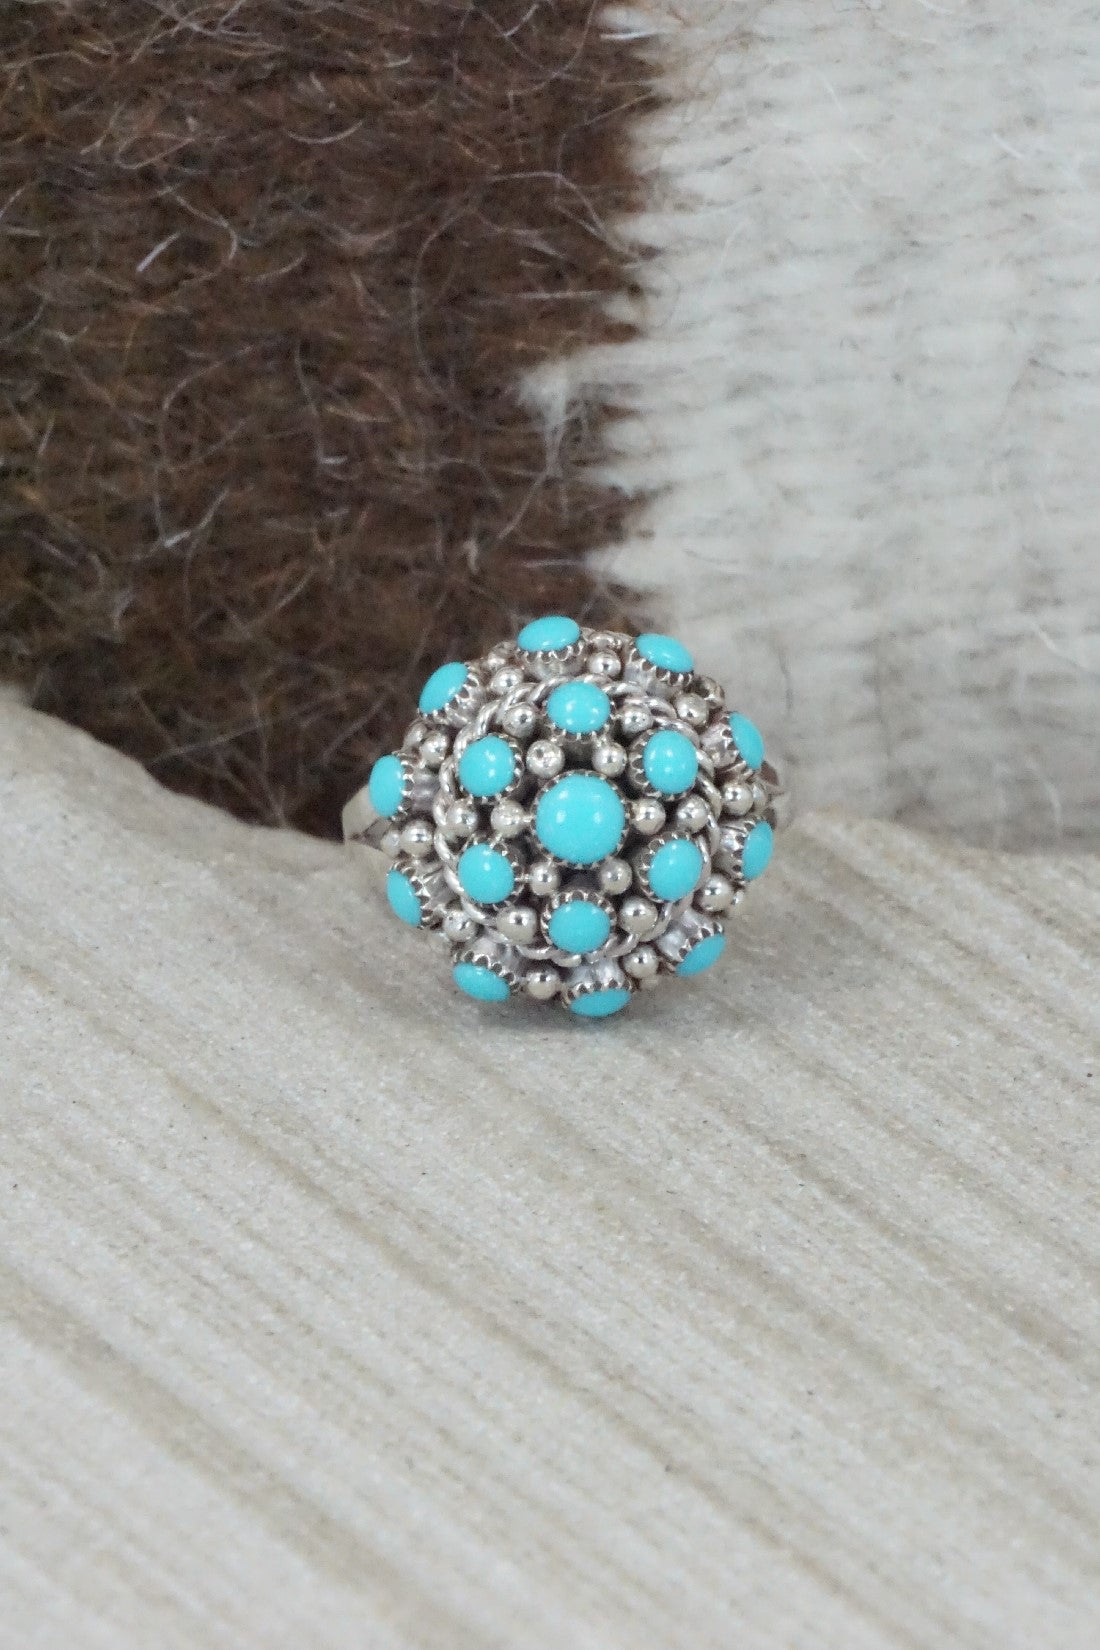 Turquoise & Sterling Silver Ring - Dickie Charlie - Size 7